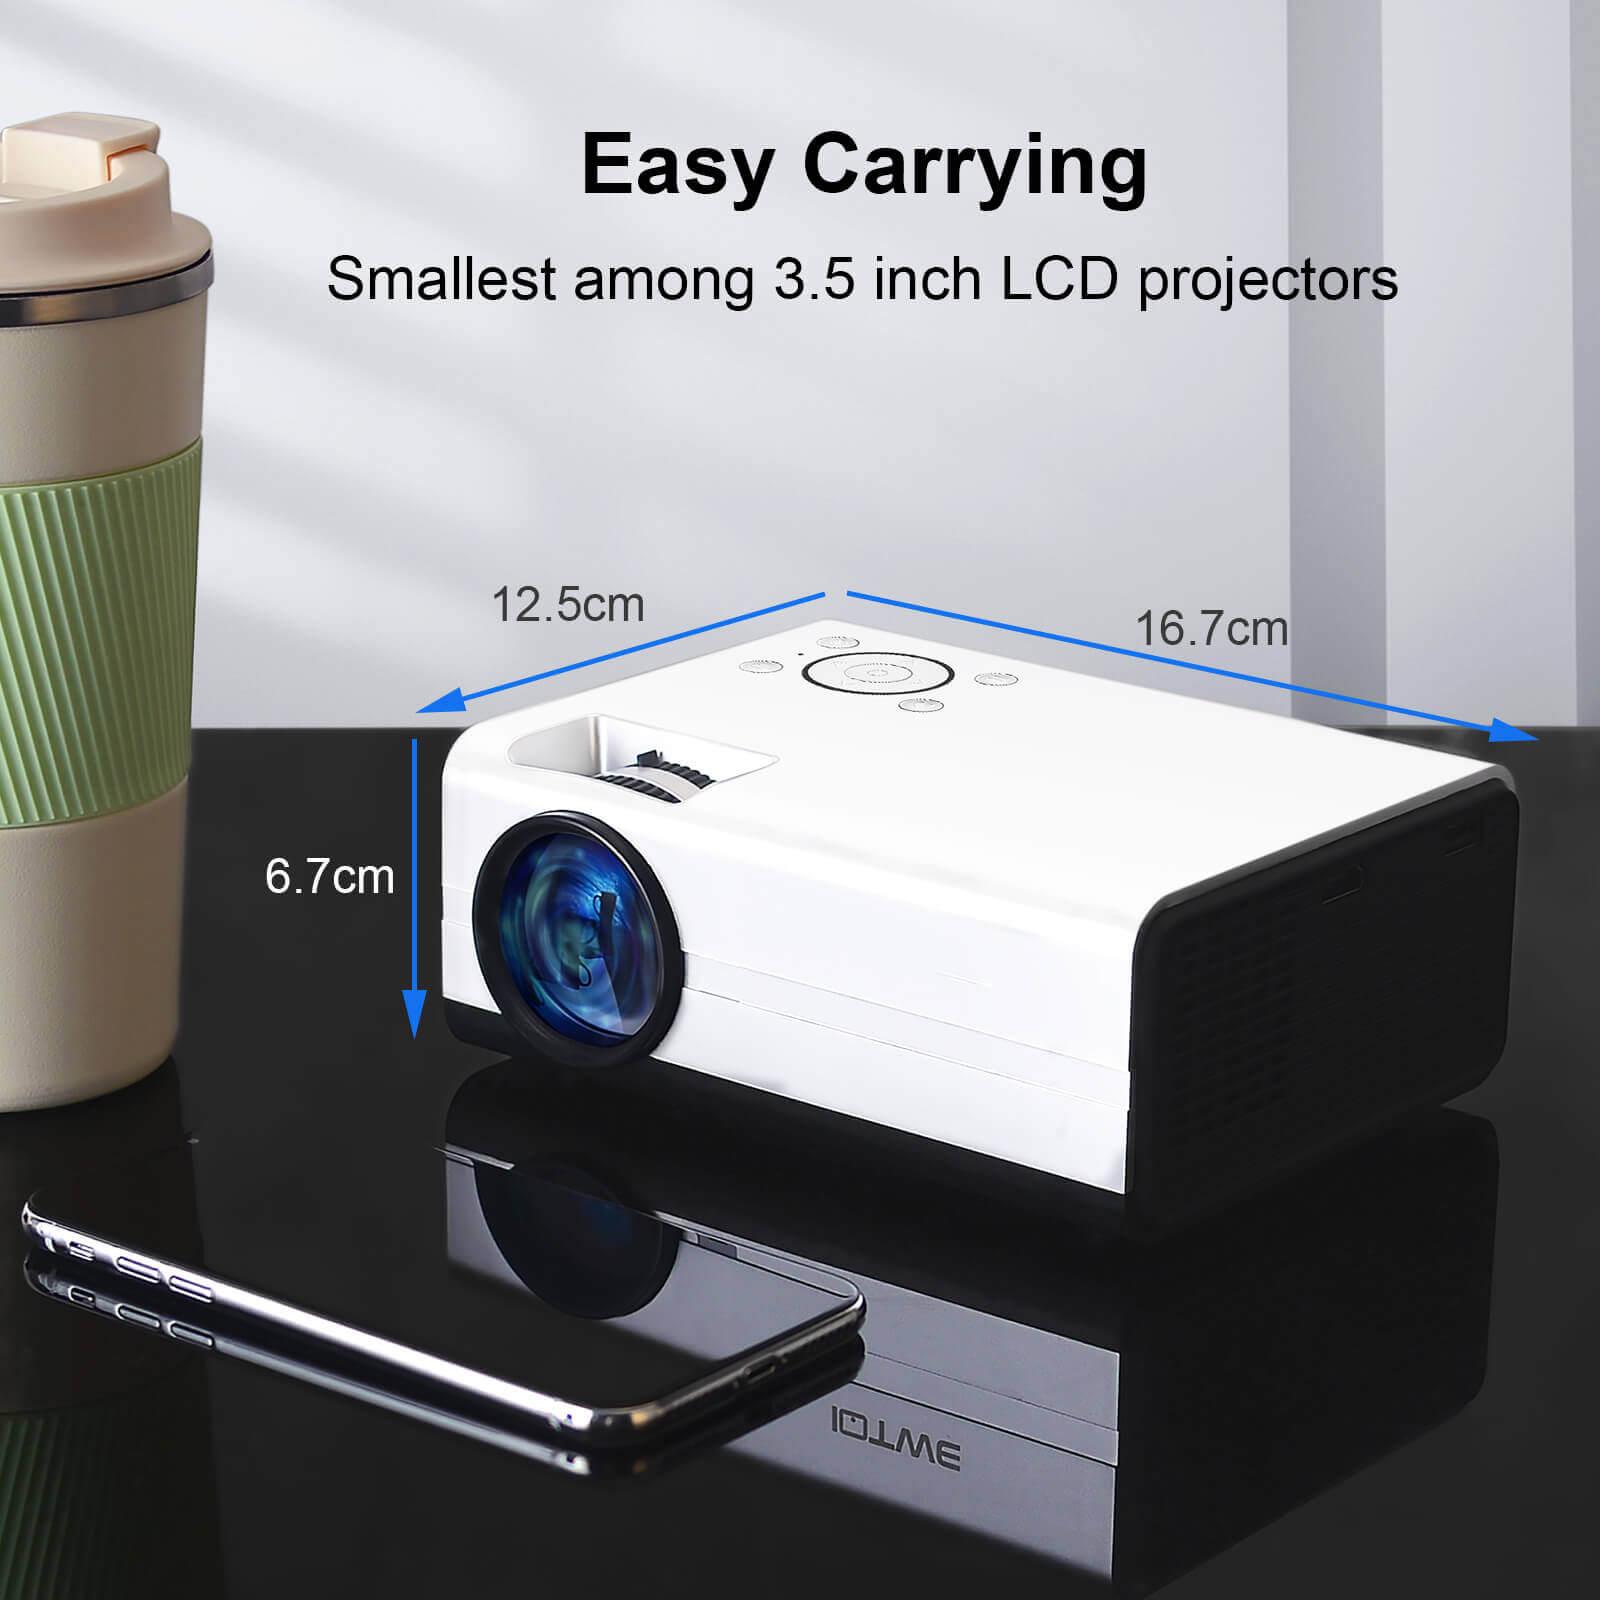 Cost-effective and Most worthwhile XGODY Android Mini Smart Projector T01 With WiFi Bluetooth Outdoor Video Pico Projector Support 1080P - XGODY 